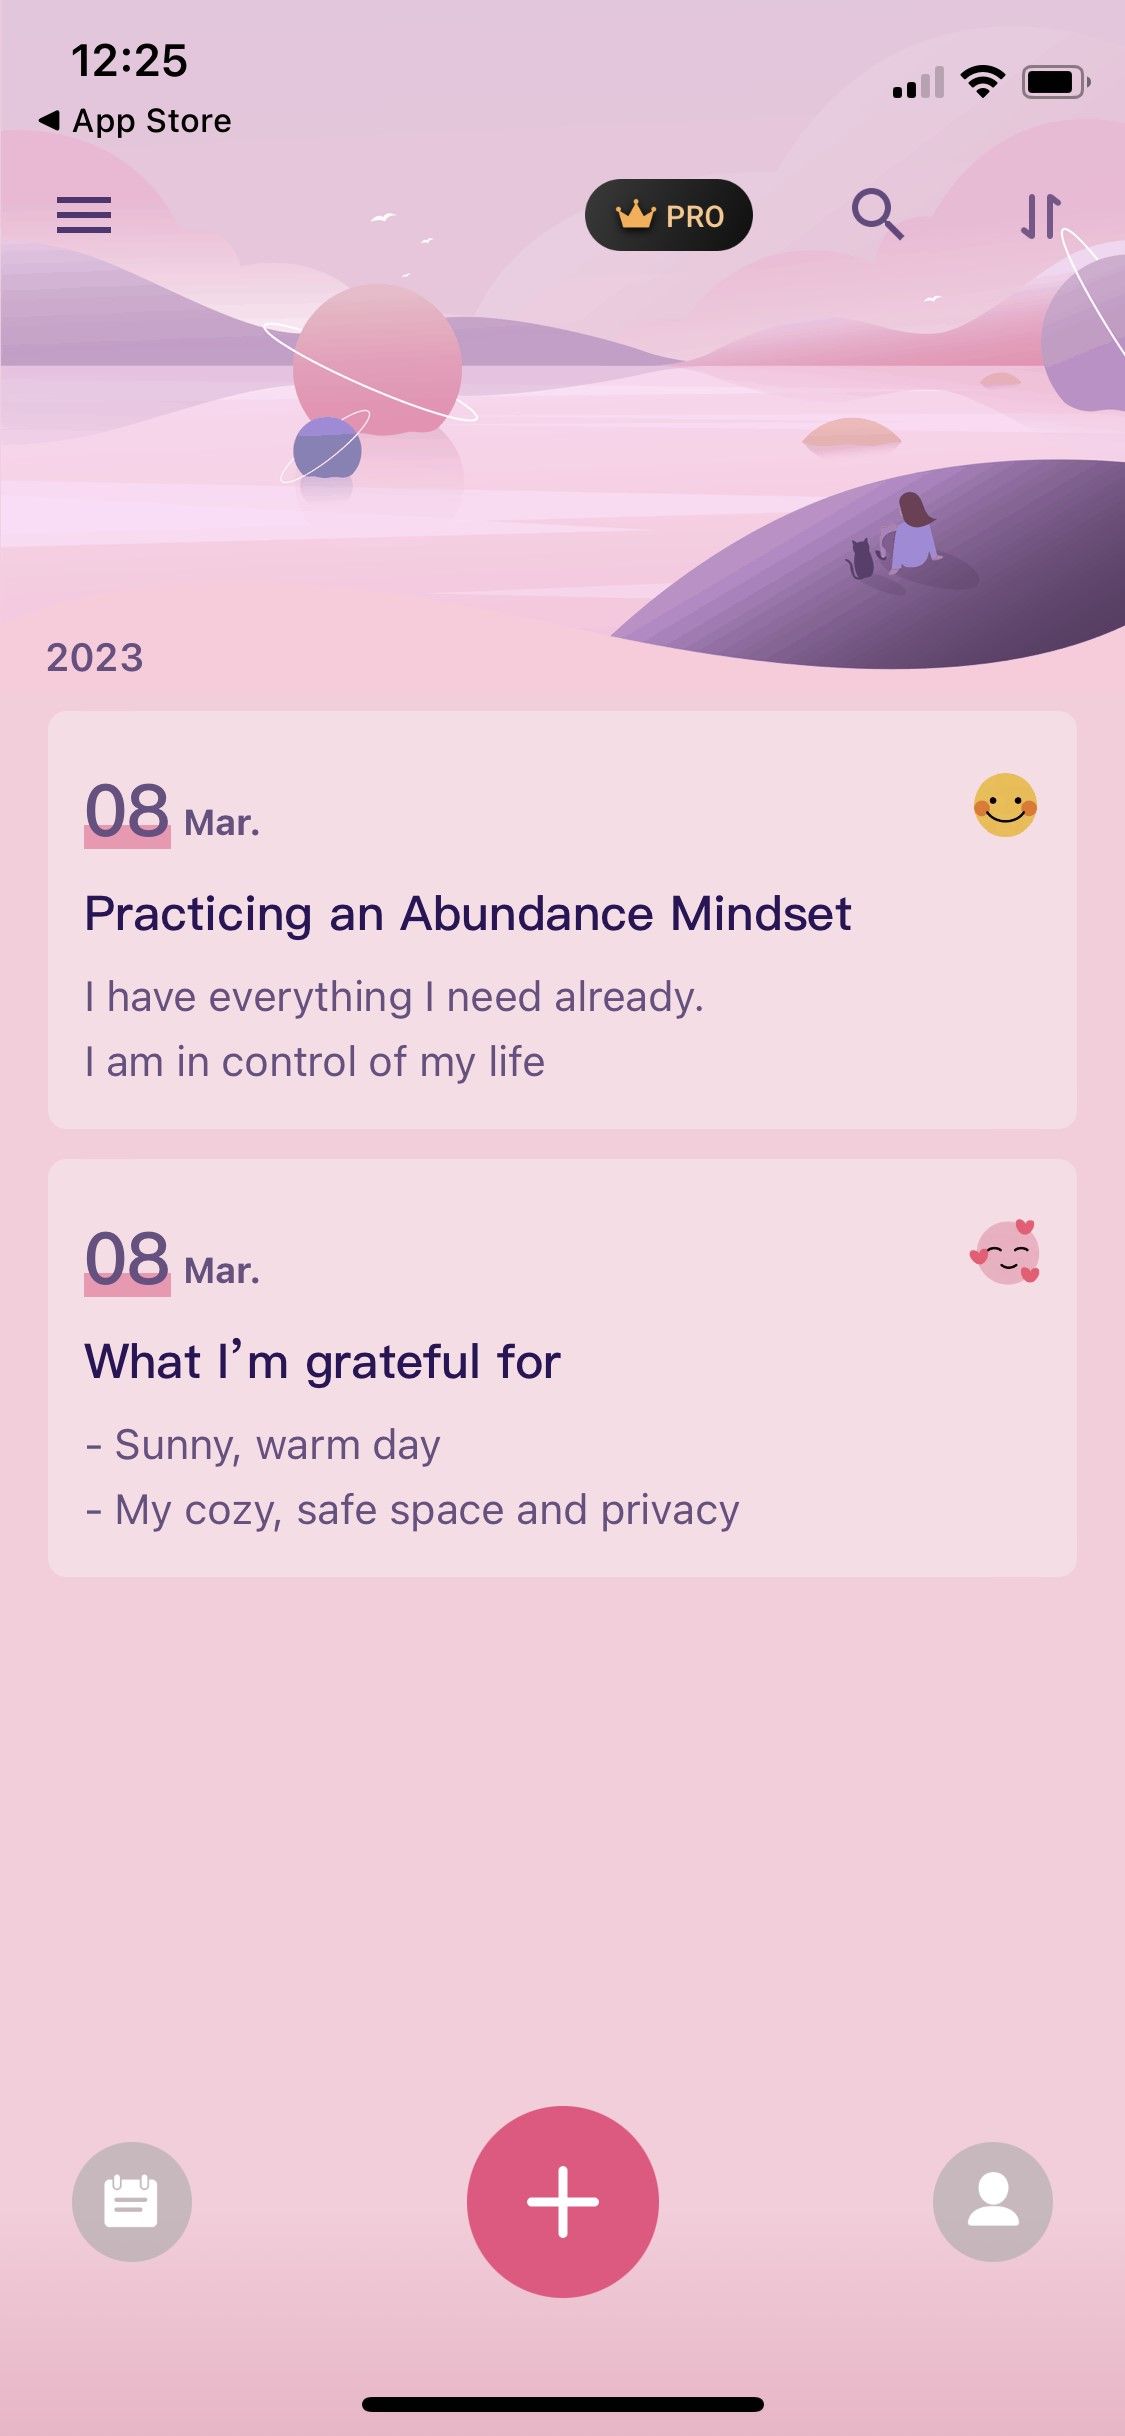 Use My Diary to Practice Gratitude and Find Your Purpose